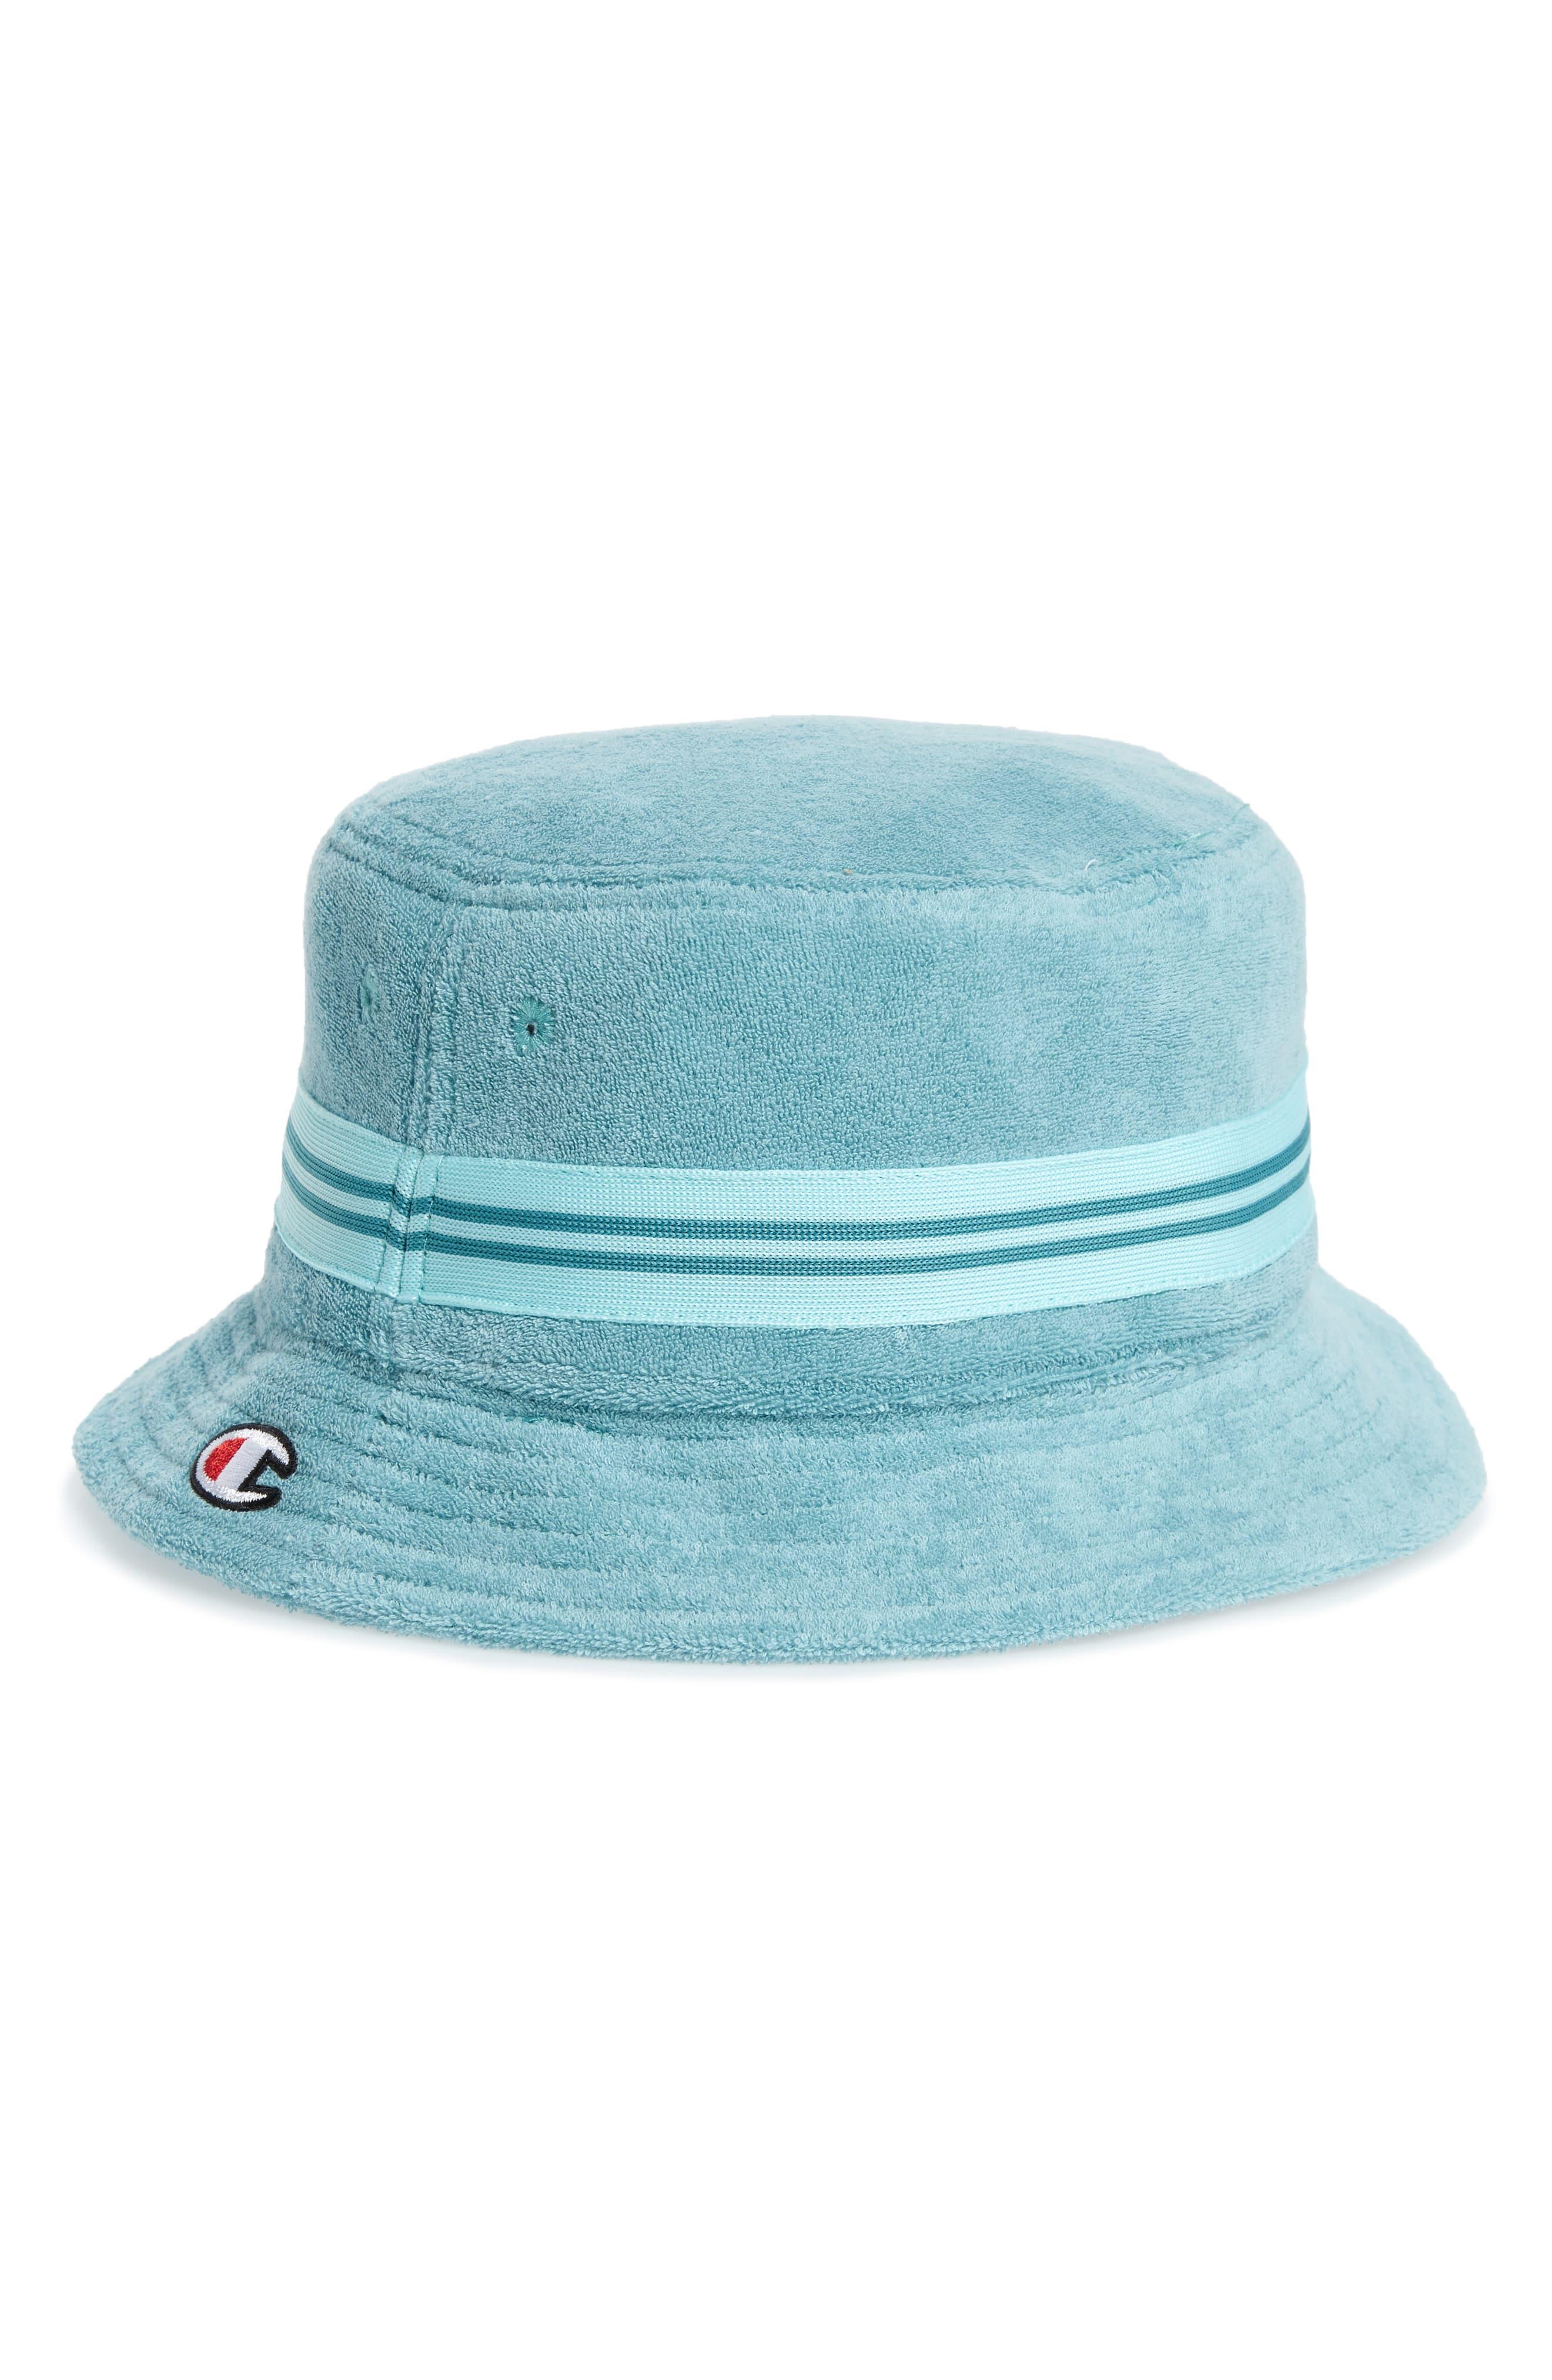 Champion Terry Bucket Hat in Blue for Men - Lyst